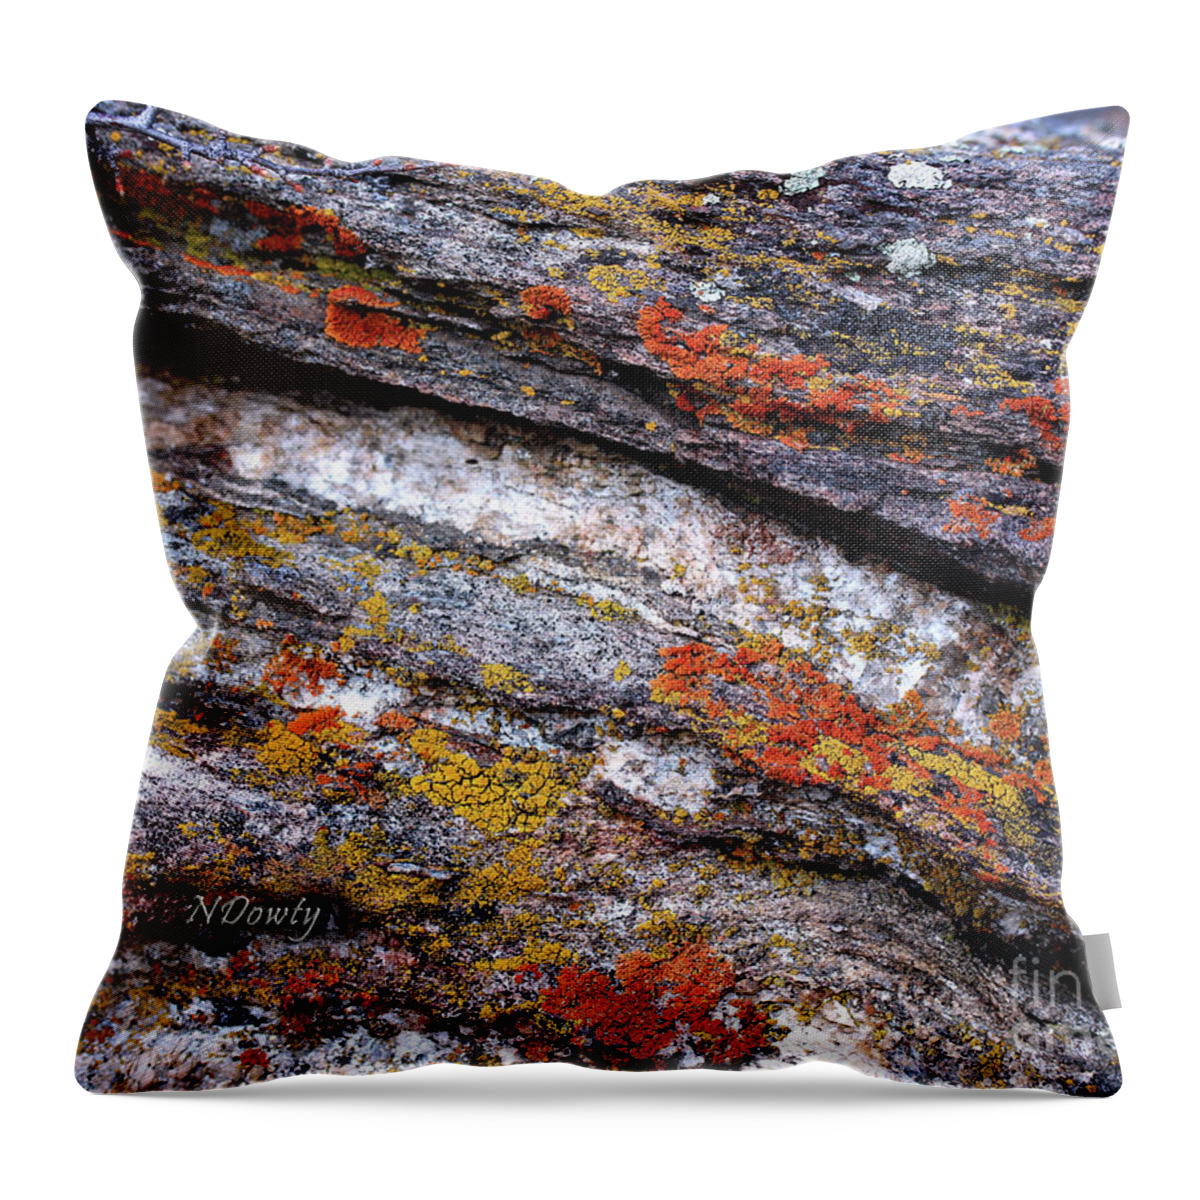 Stone And Lichen Throw Pillow featuring the photograph Stone and Lichen by Natalie Dowty